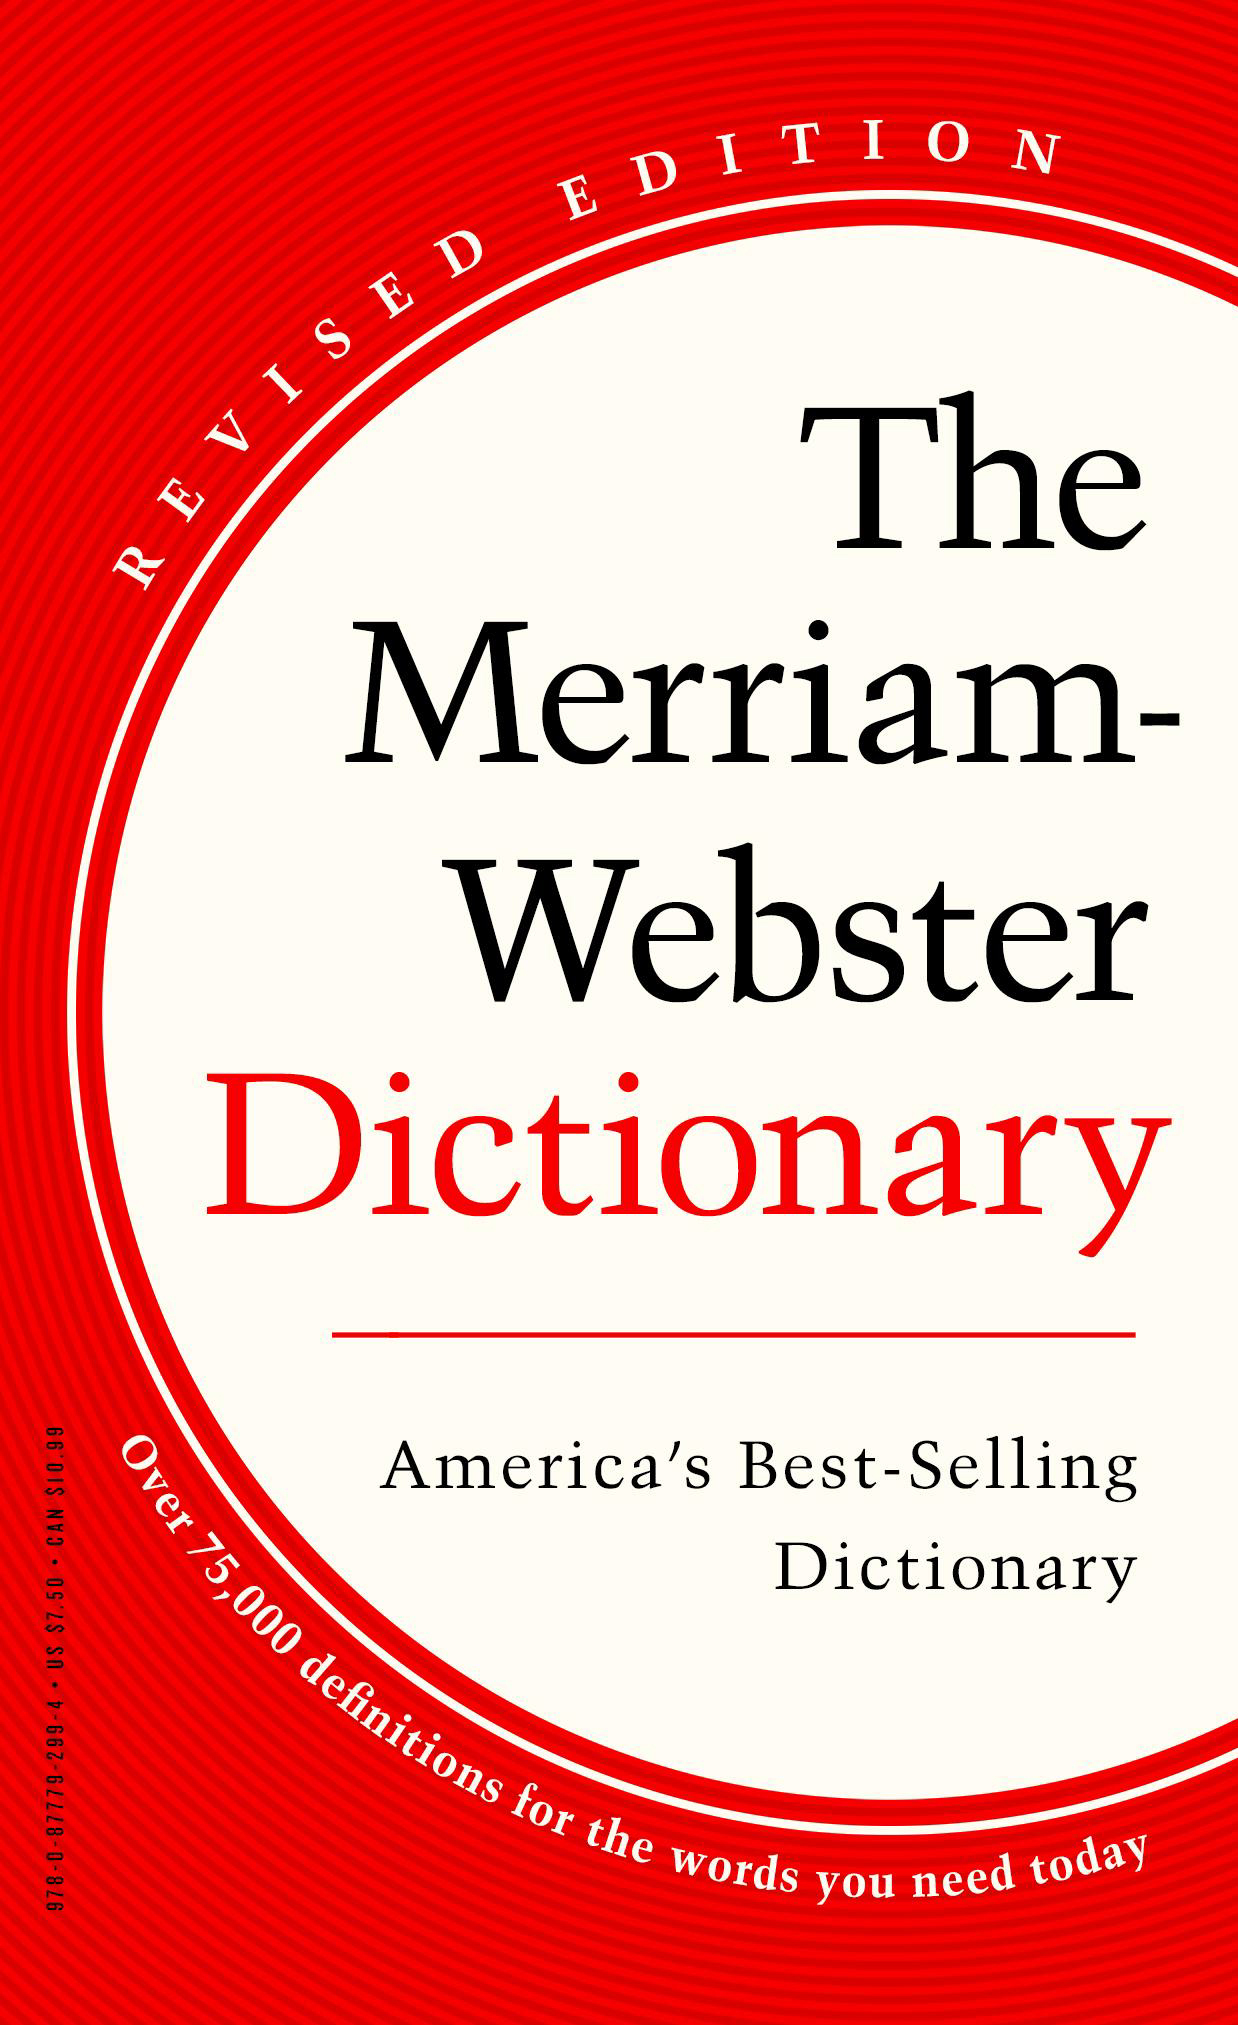 Merriam-Webster Dictionary, The